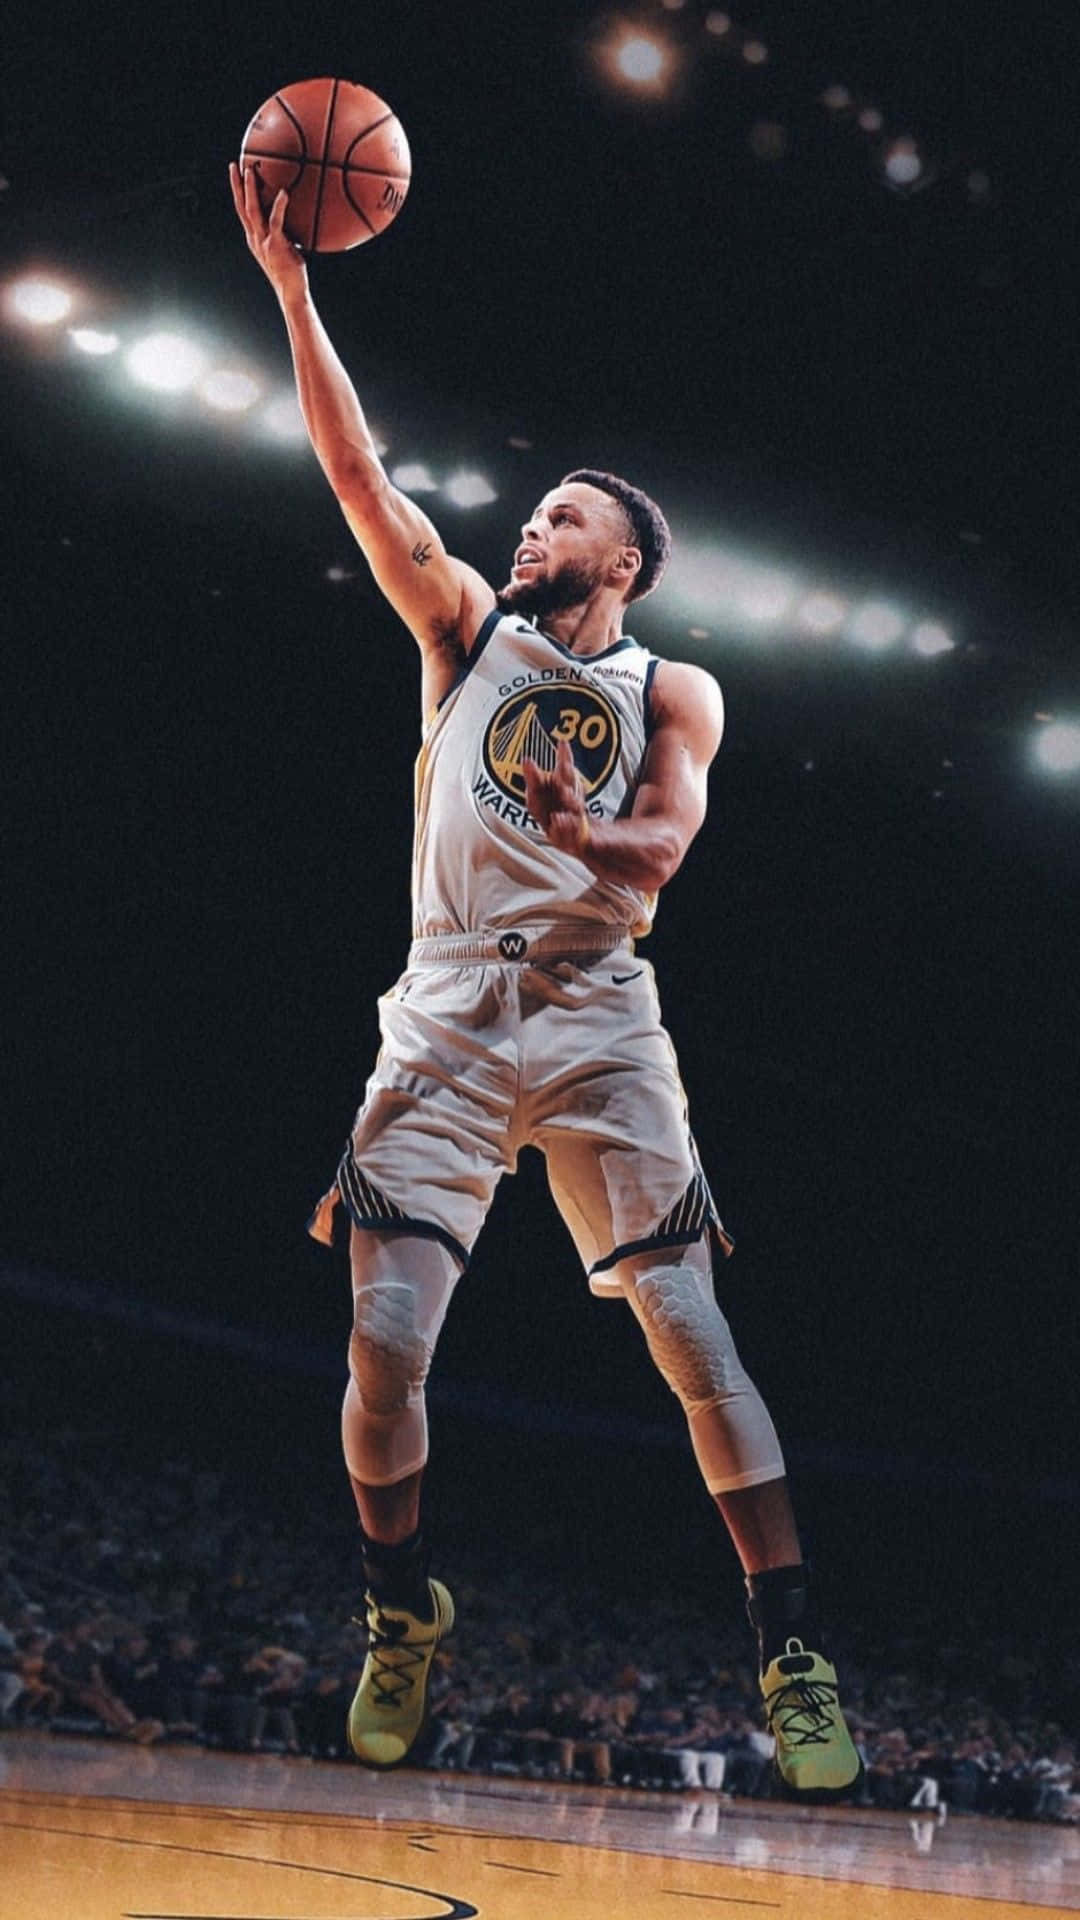 Aesthetic Nba Pictures Wallpaper